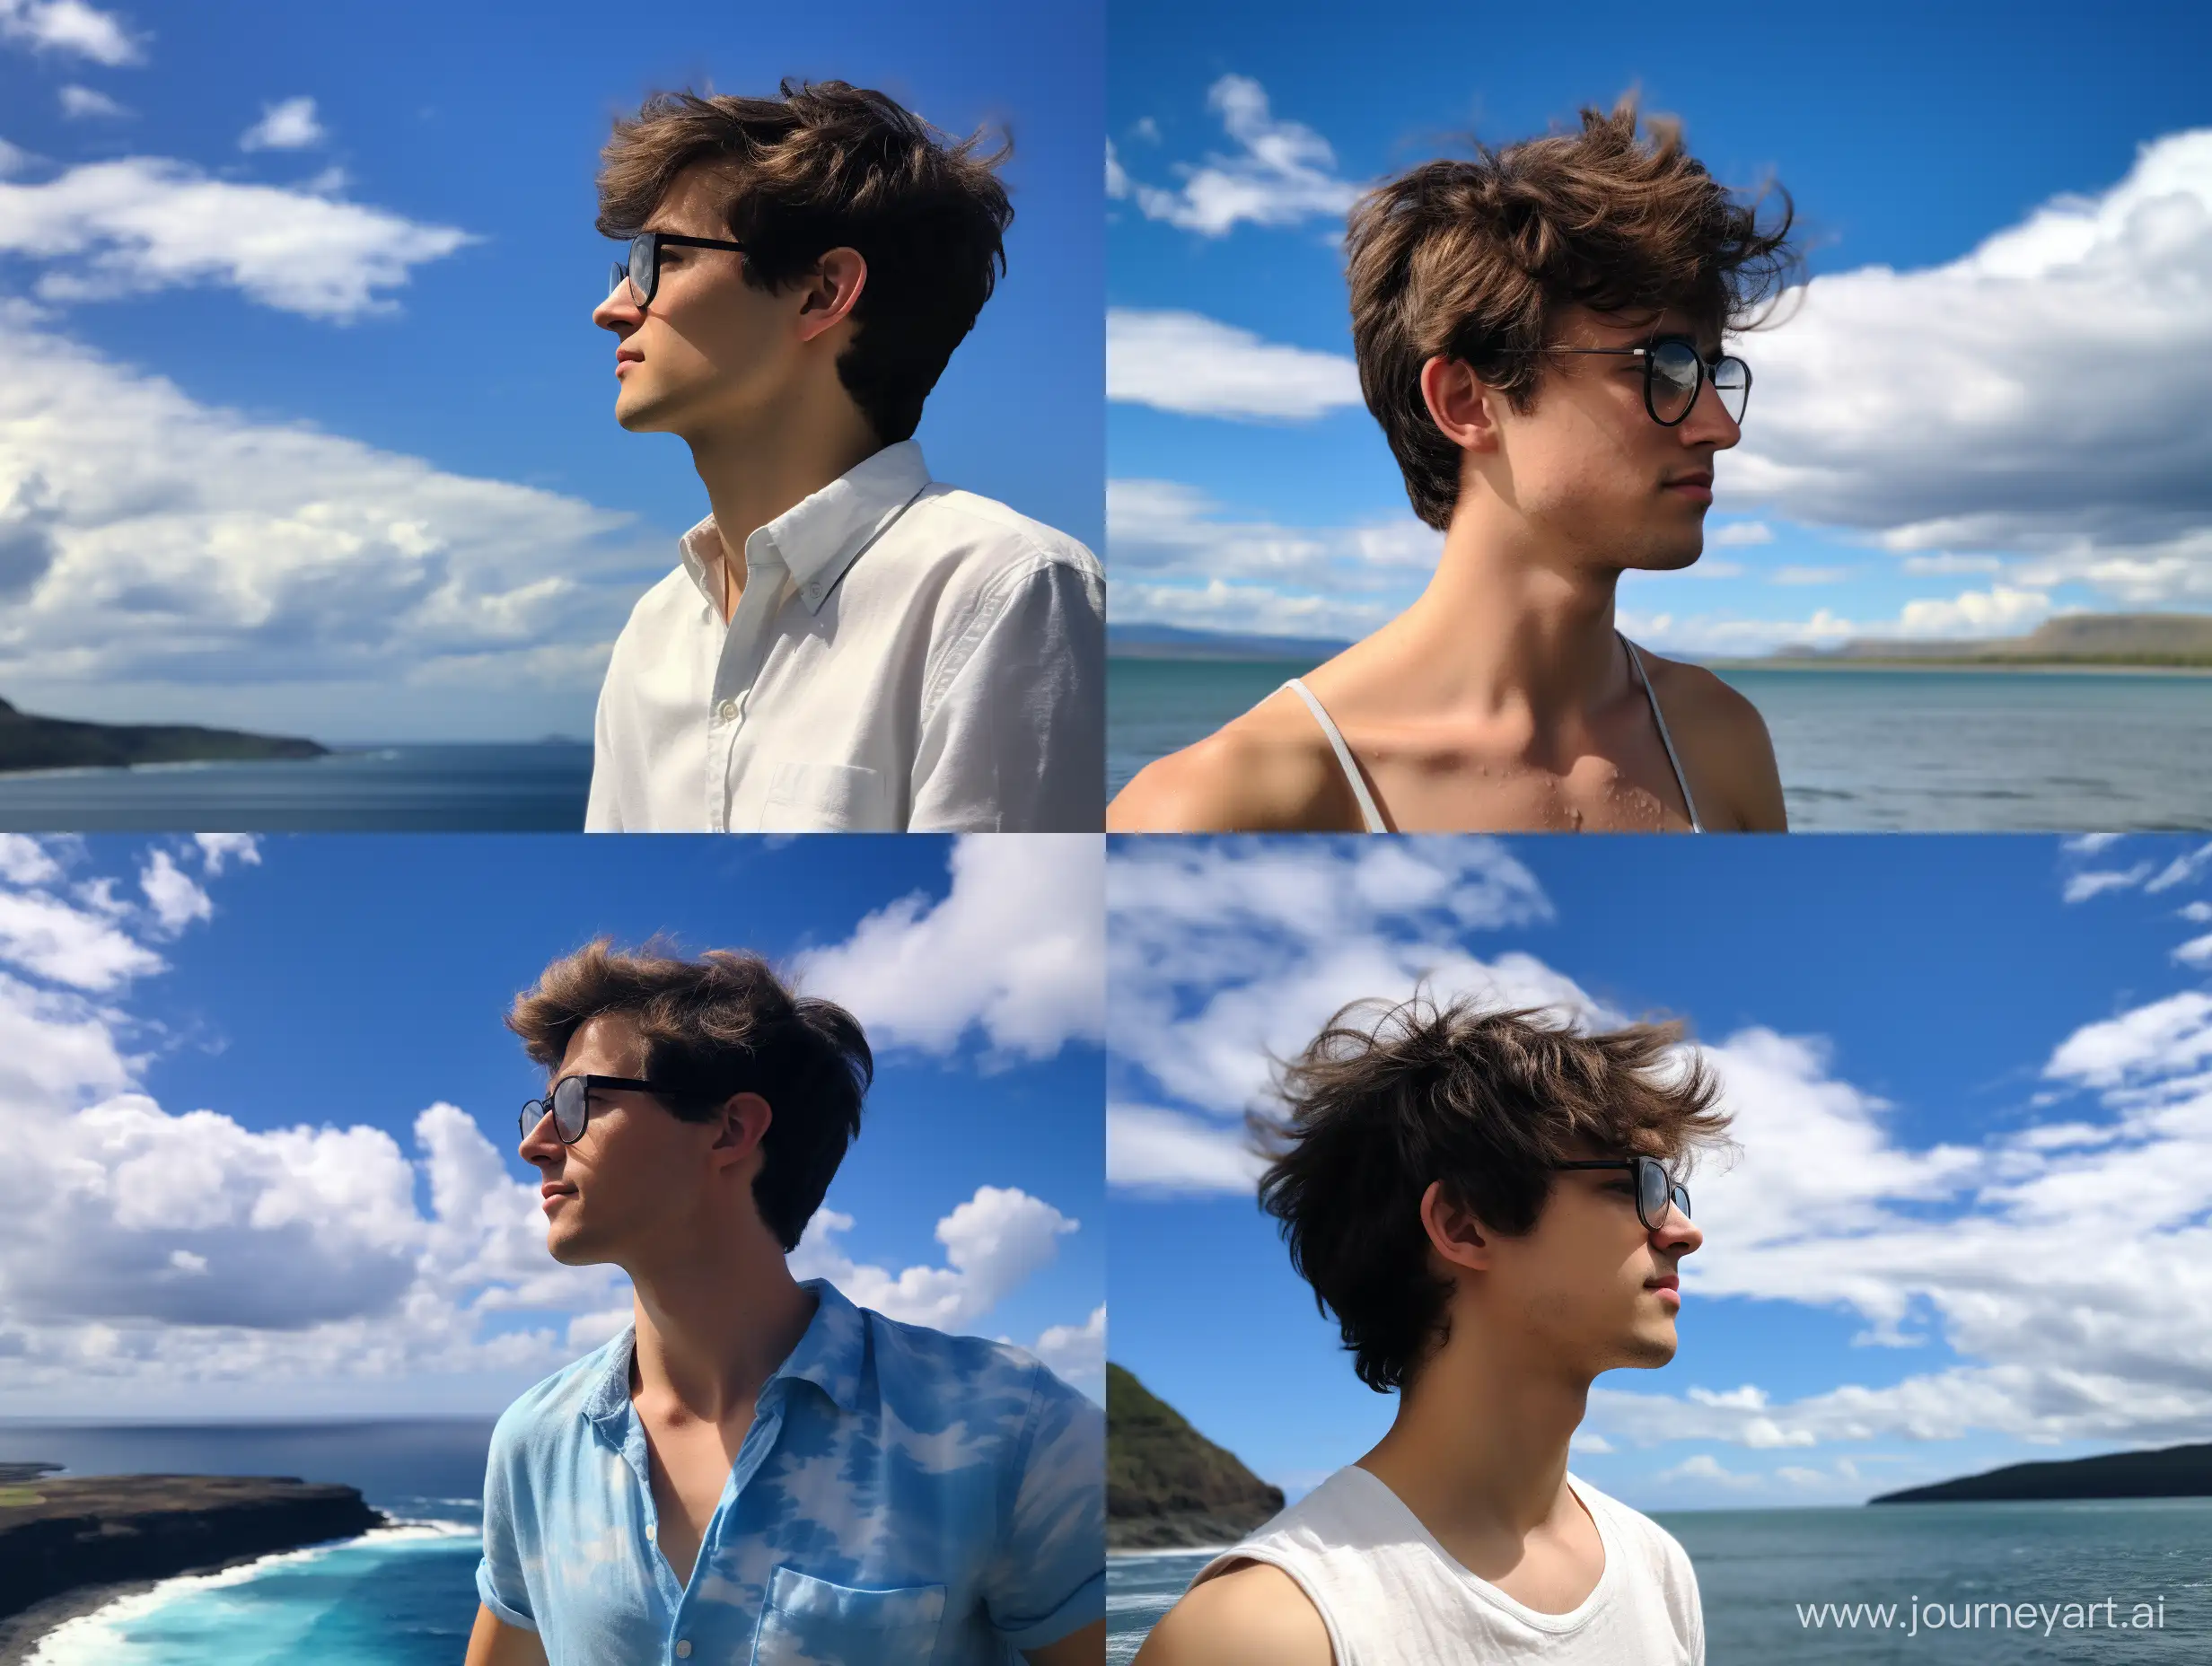 Serene-Waterfront-Moment-Young-Man-Contemplating-Nature-in-Aviator-Glasses